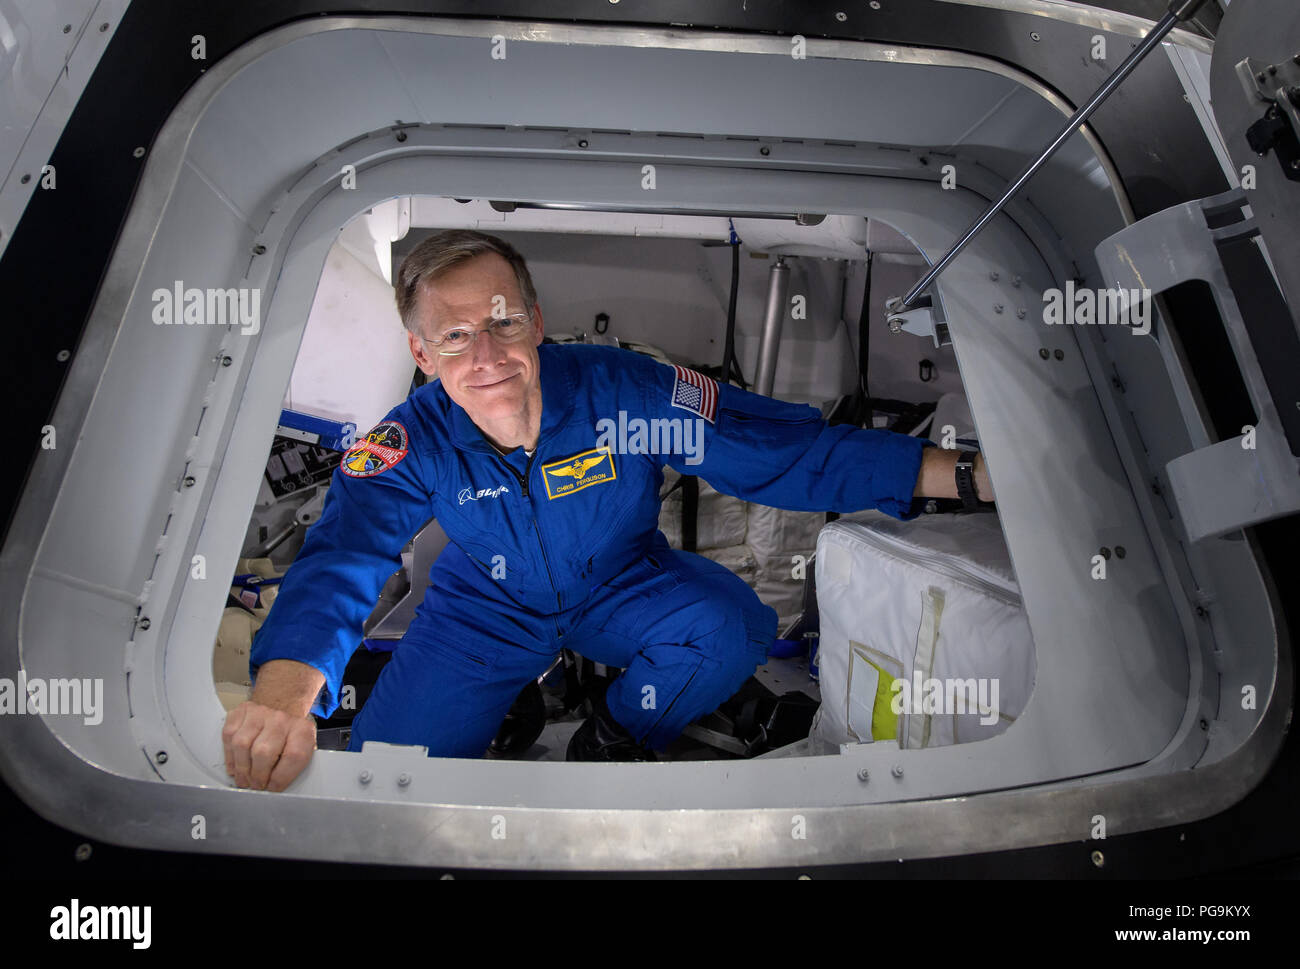 Boeing astronaut Chris Ferguson poses for a photograph as he exits the Boeing Mockup Trainer at NASA’s Johnson Space Center in Houston, Texas on Aug. 2, 2018 ahead of the commercial crew flight assignments announcement Aug. 3. Ferguson, along with NASA astronauts Eric Boe and Nicole Aunapu Mann were assigned to launch aboard Boeing’s CST-100 Starliner on the company’s Crew Flight Test targeted for mid-2019 in partnership with NASA’s Commercial Crew Program. Stock Photo